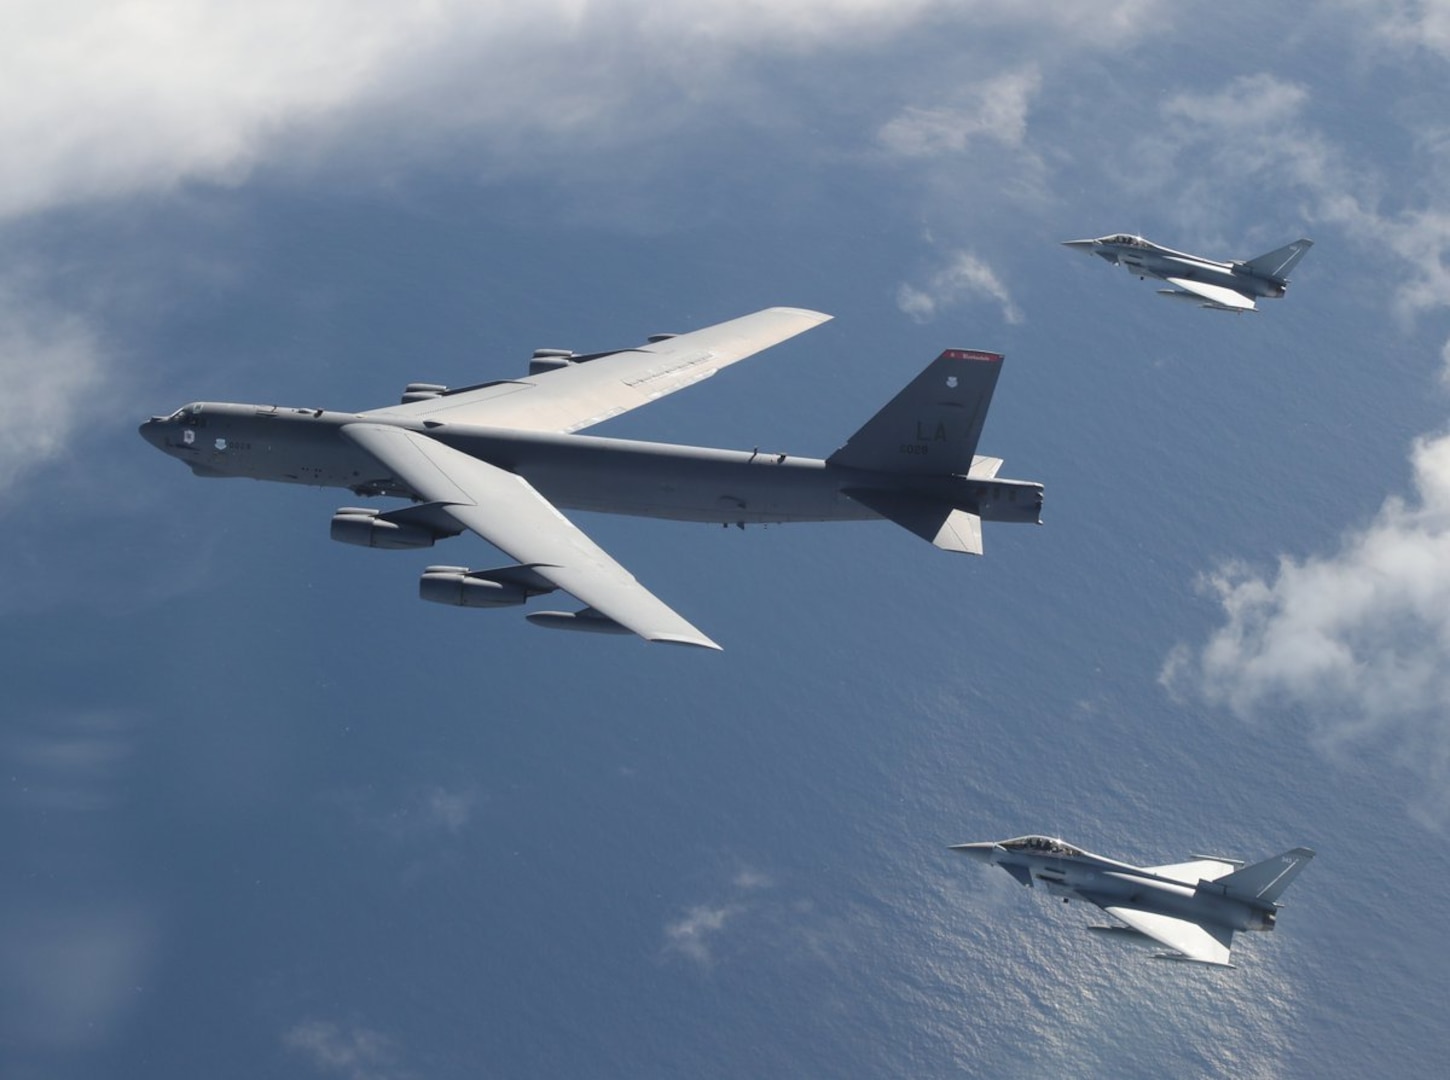 A B-52H Stratofortress from the 2nd Bomb Wing at Barksdale Air Force Base, La., integrates with Royal Air Force Typhoon fighters during Global Thunder as part of a Bomber Task Force mission Oct. 28, 2019. The mission tested areas of mutual concern and fortified military collaboration. (Royal Air Force Photo)